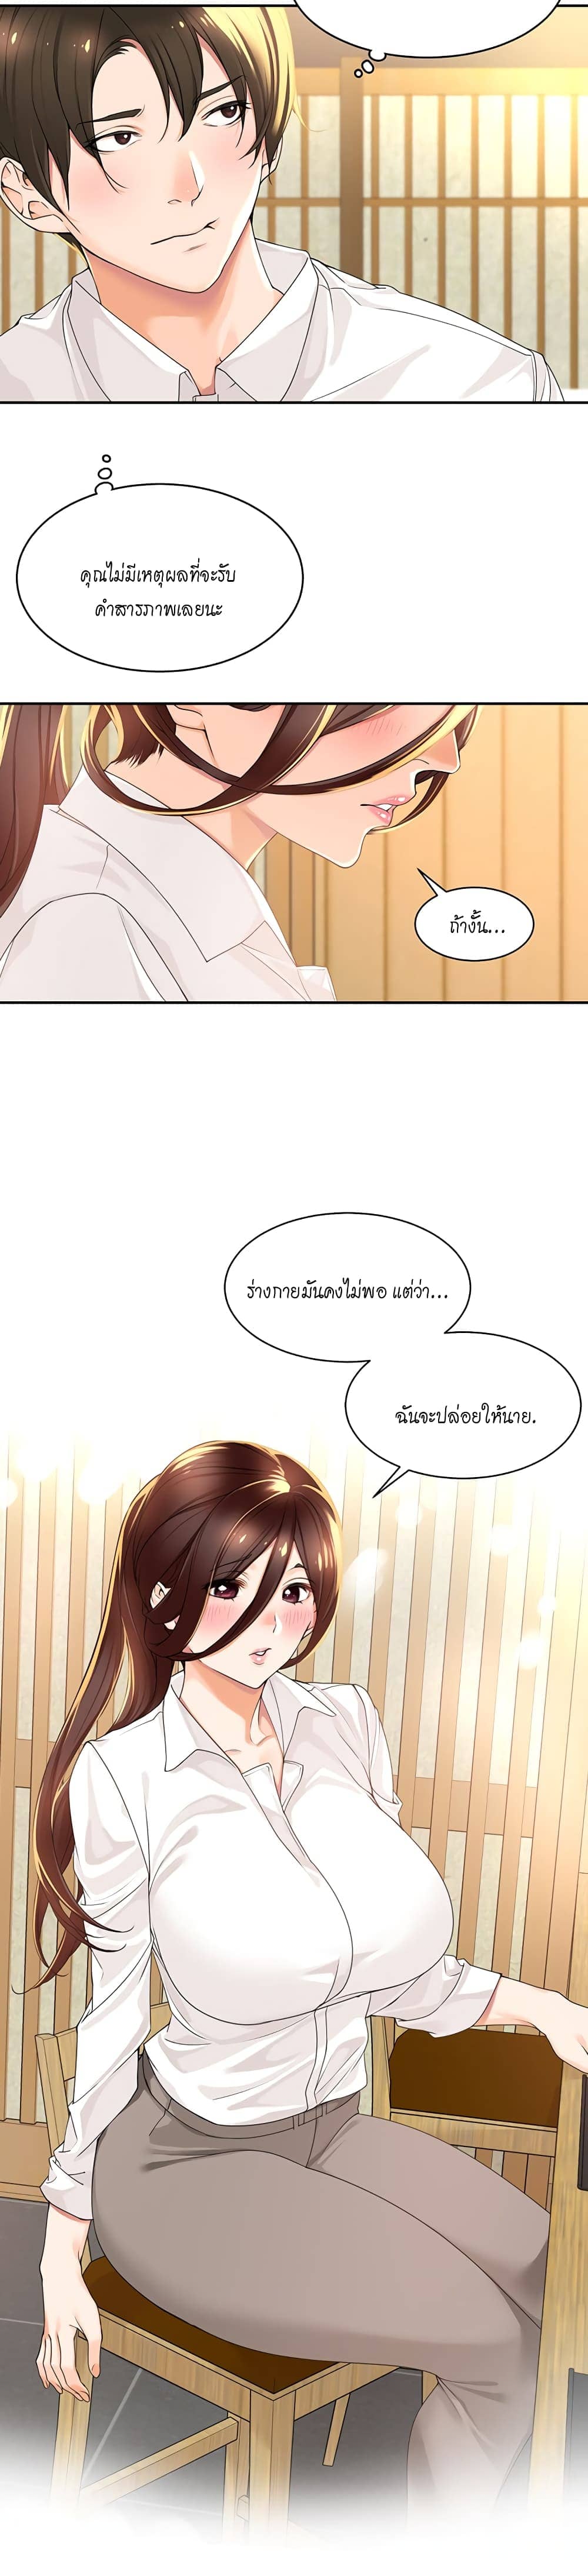 Manager, Please Scold Me ตอนที่ 2 ภาพ 11